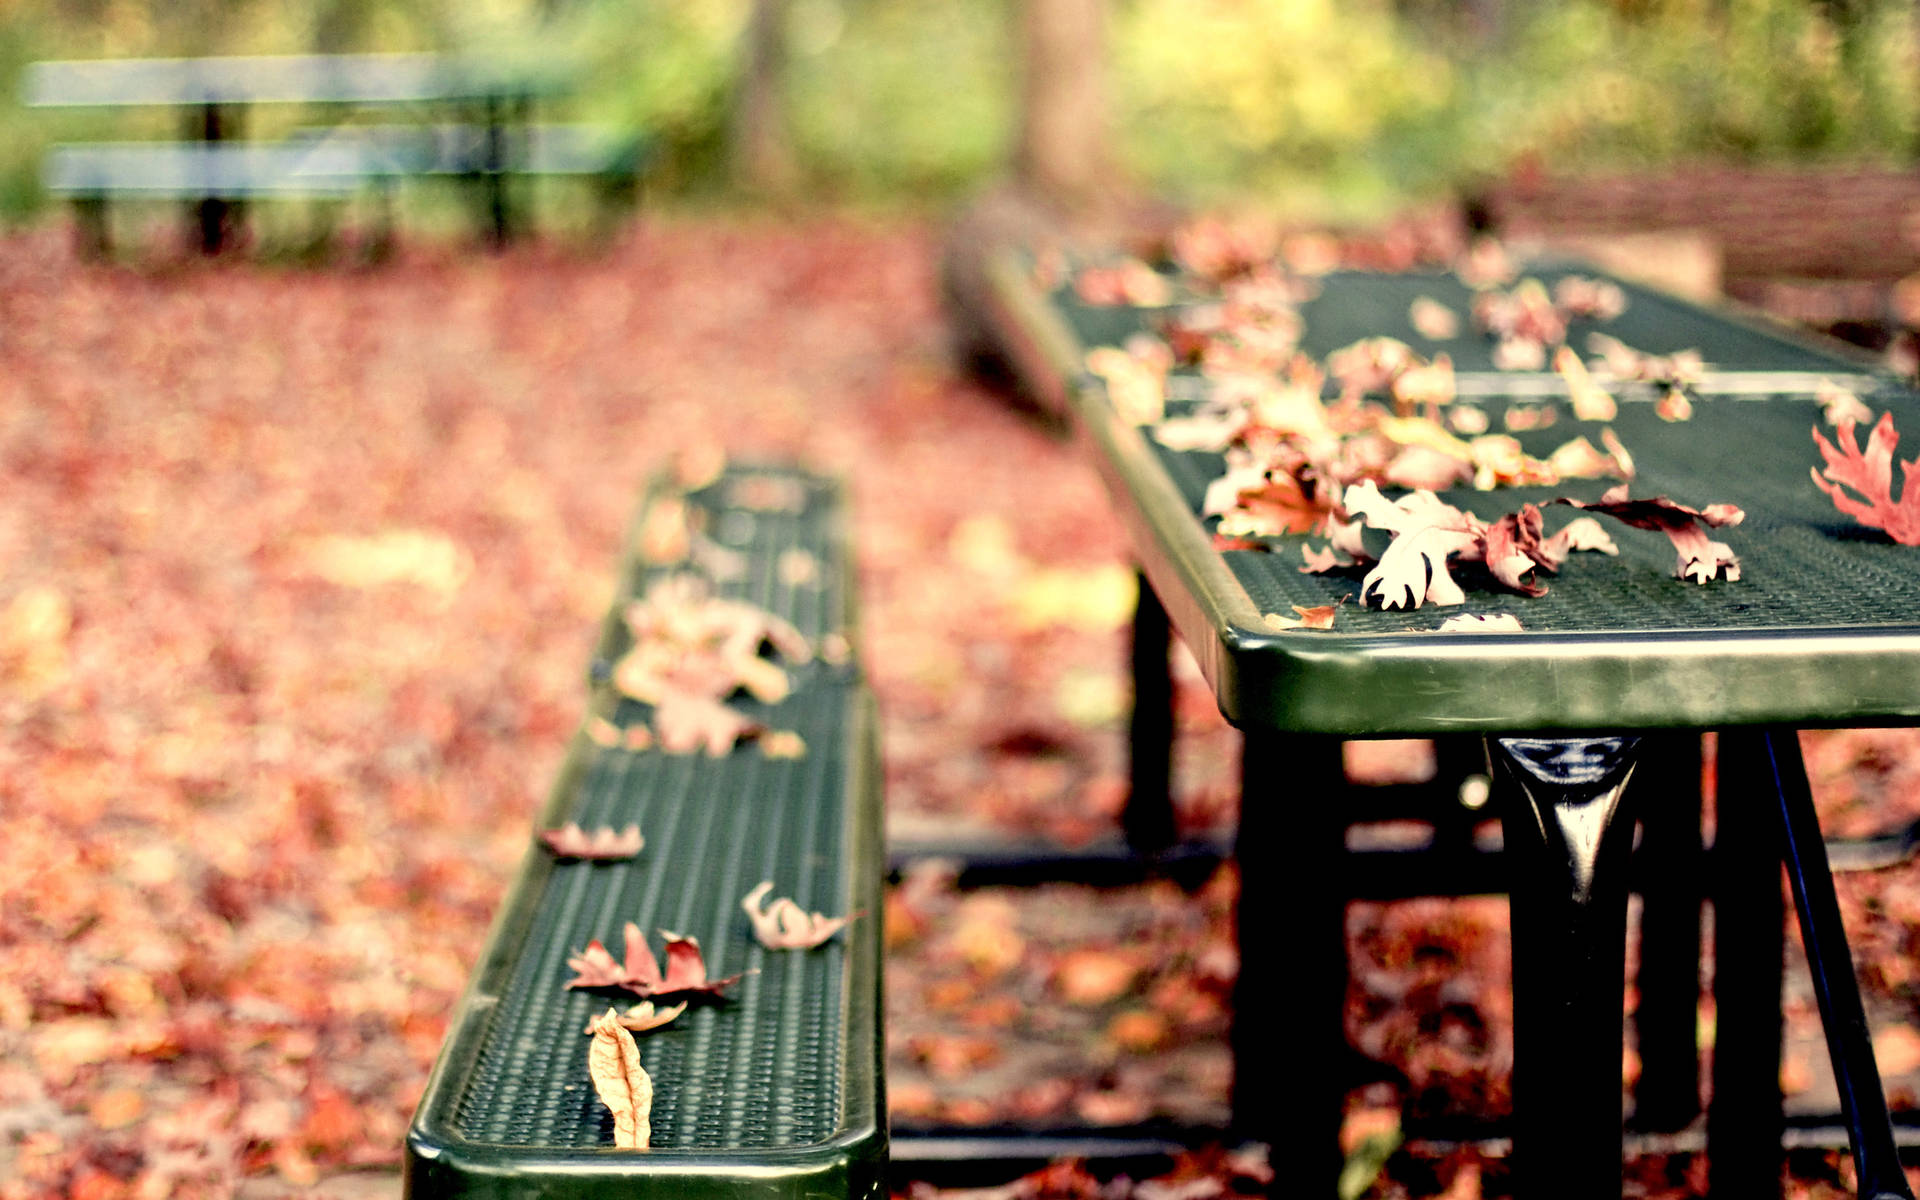 Sturdy Metal Picnic Bench in a Park Wallpaper